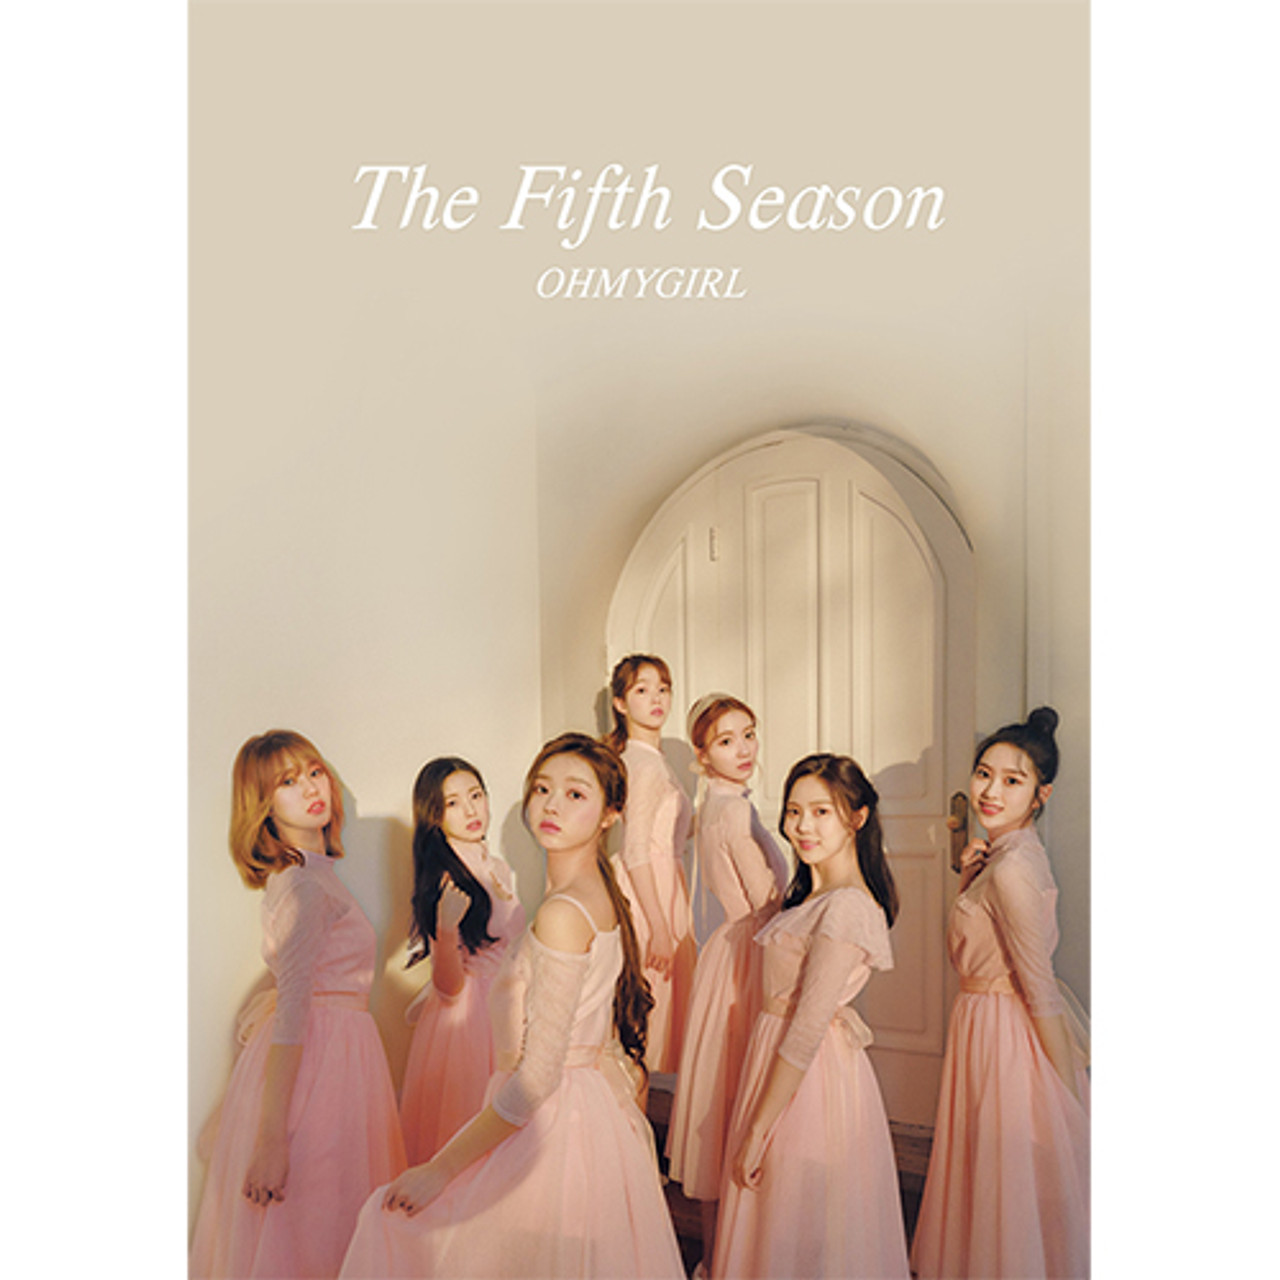 OH MY GIRL  1st Album  THE FIFTH SEASON  PHOTOGRAPHY COVER VER